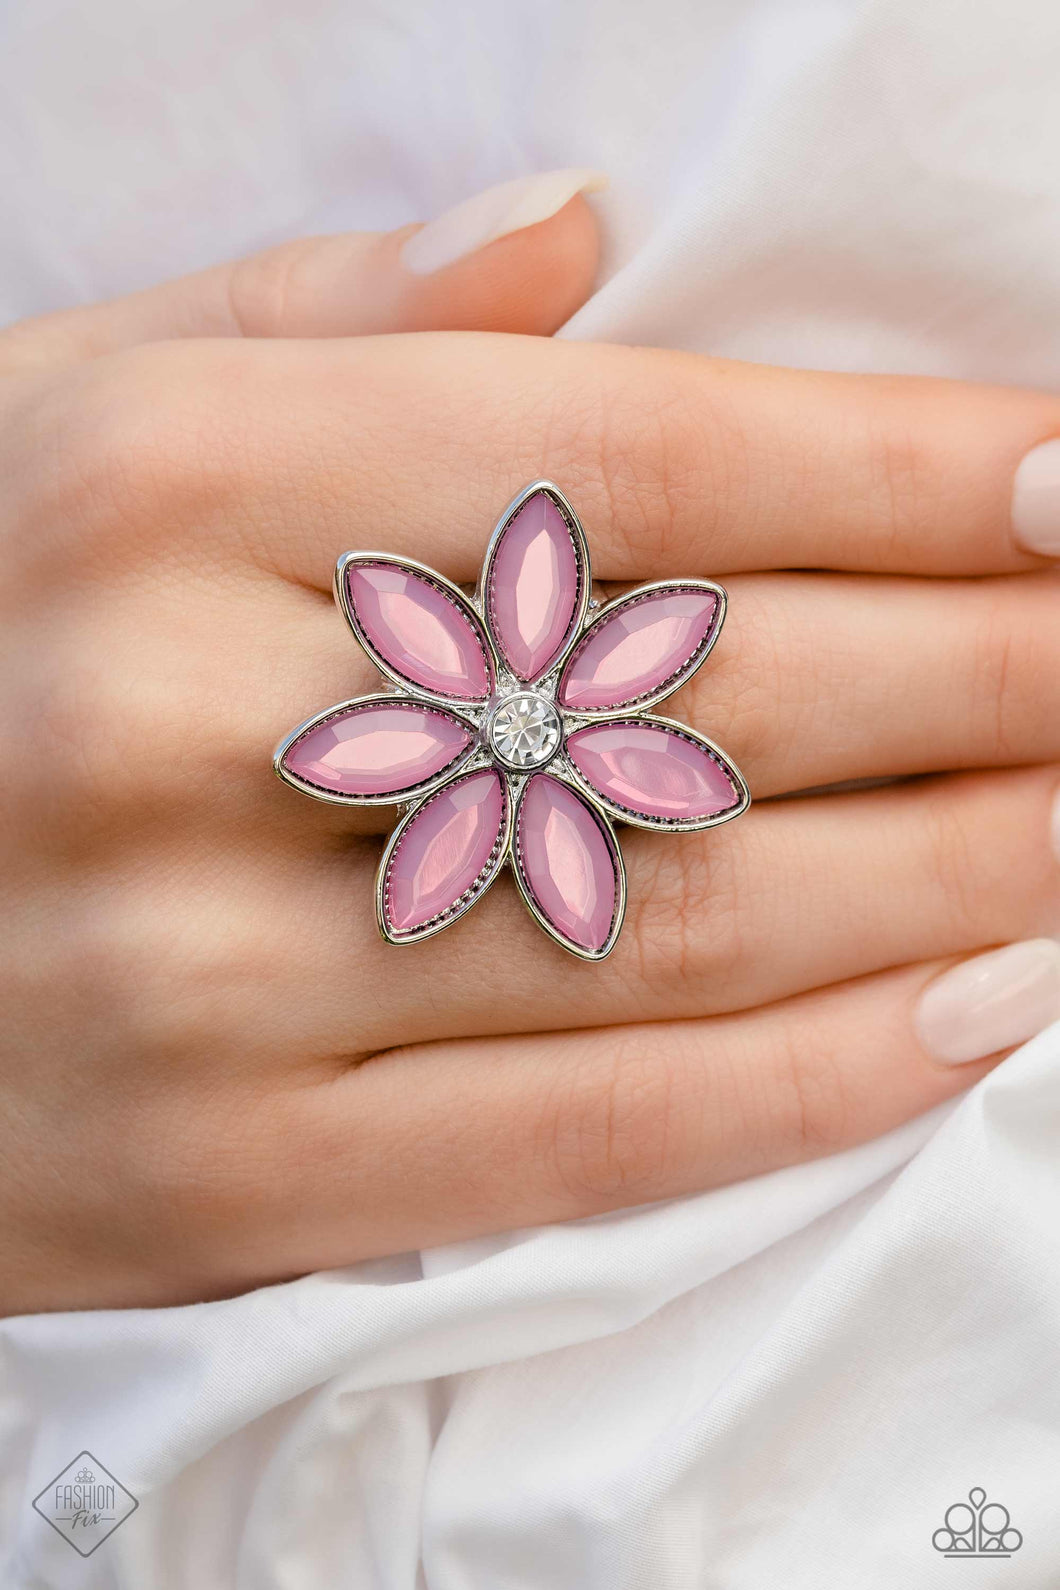 Glassy marquise-cut petals in a dreamy orchid hue, fan out around a sparkling white gem center, creating a vibrant, oversized flower that sits prominently atop the finger. Features a stretchy band for a flexible fit.  Sold as one individual ring.